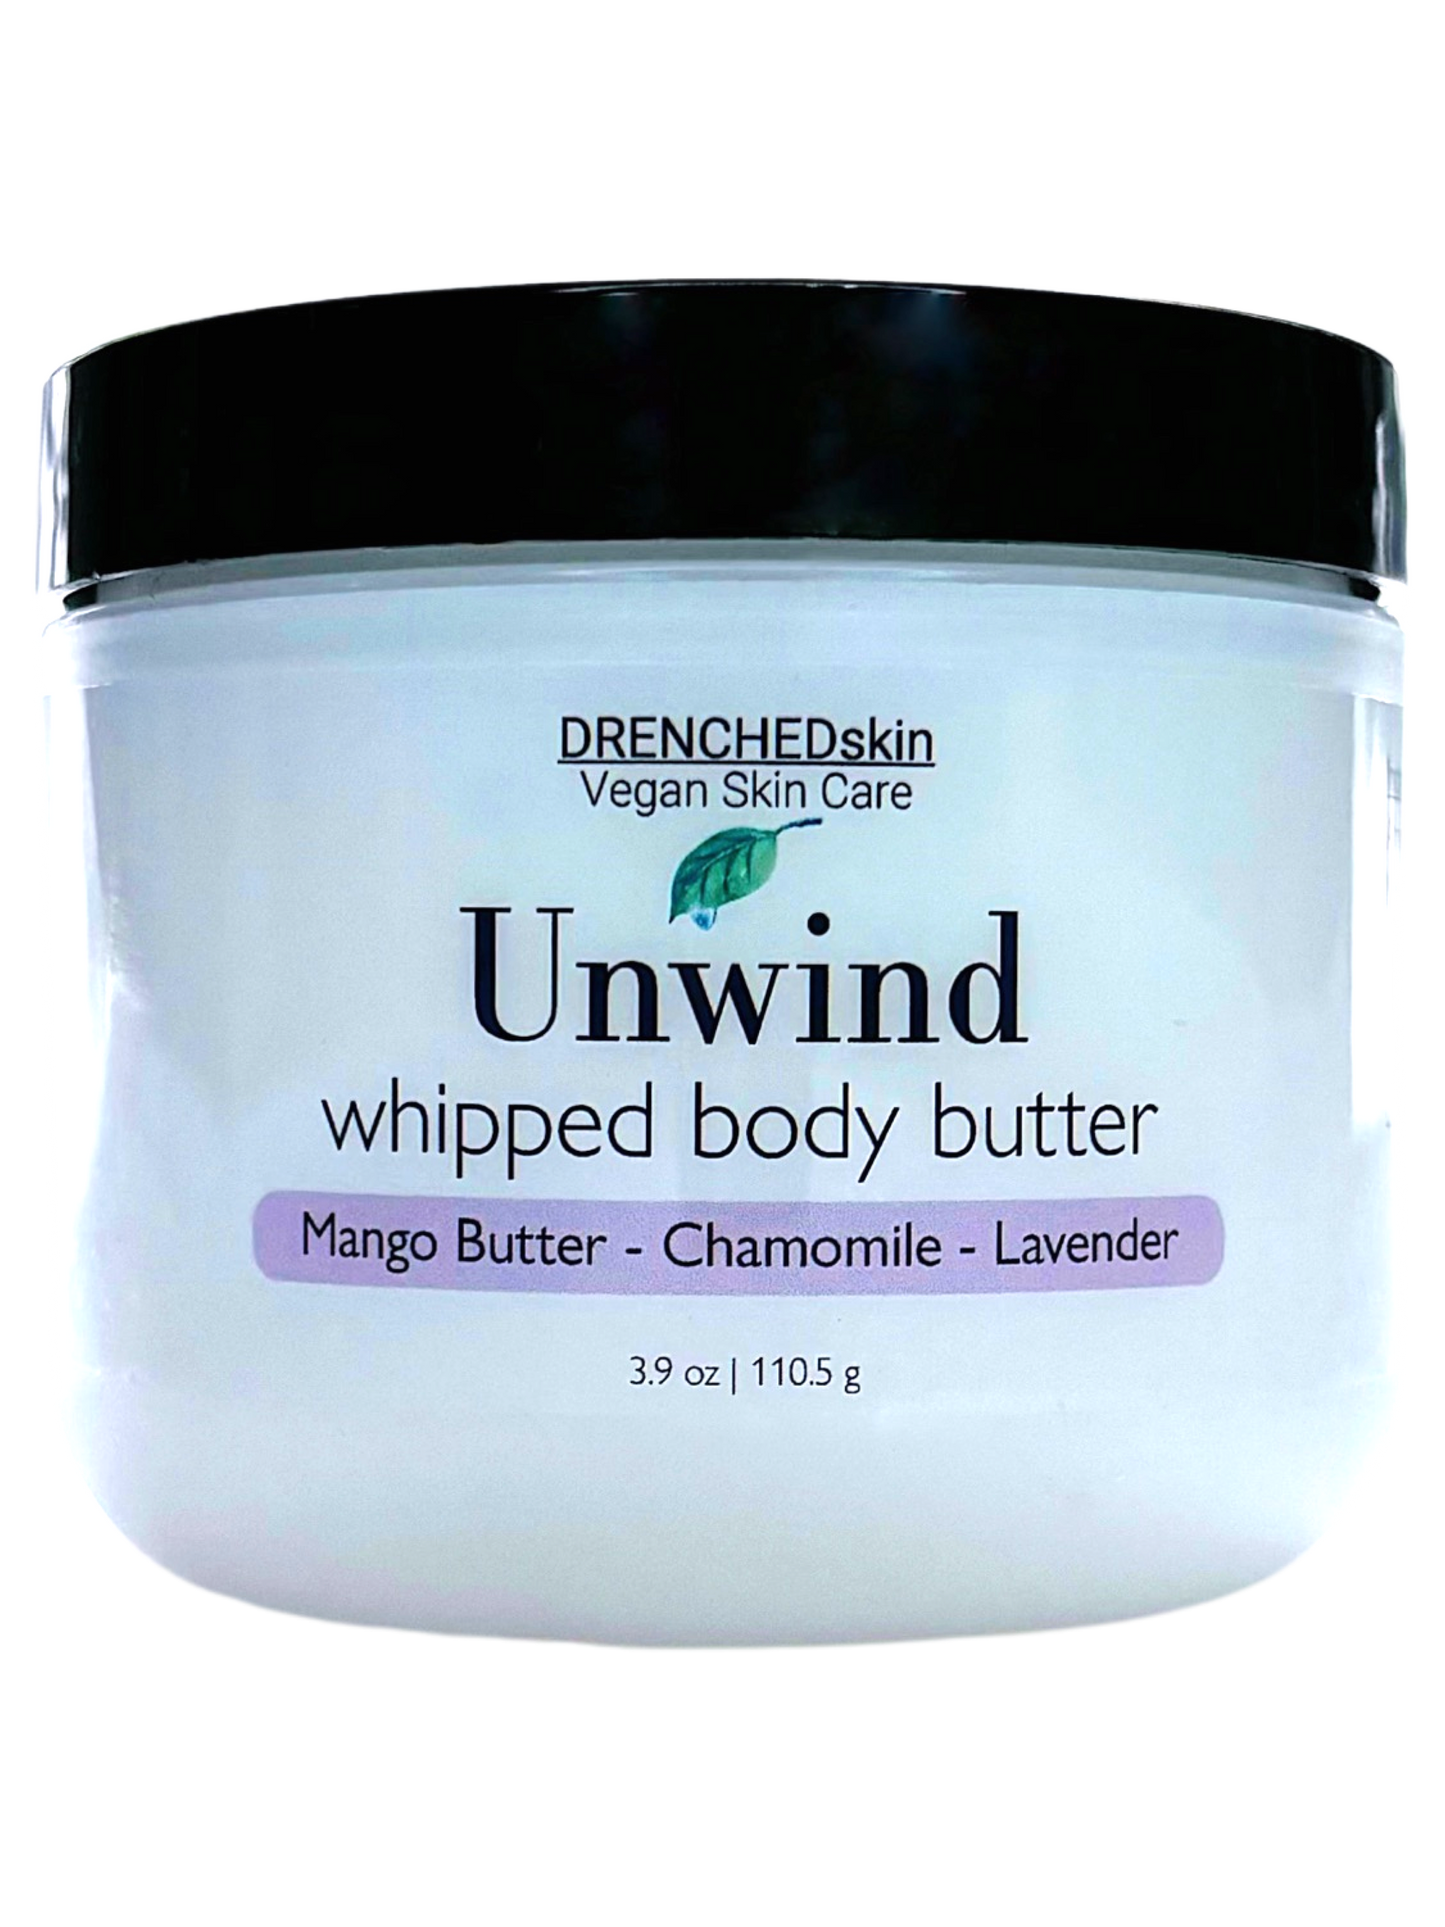 UNWIND Whipped Body Butter - DRENCHEDskin®